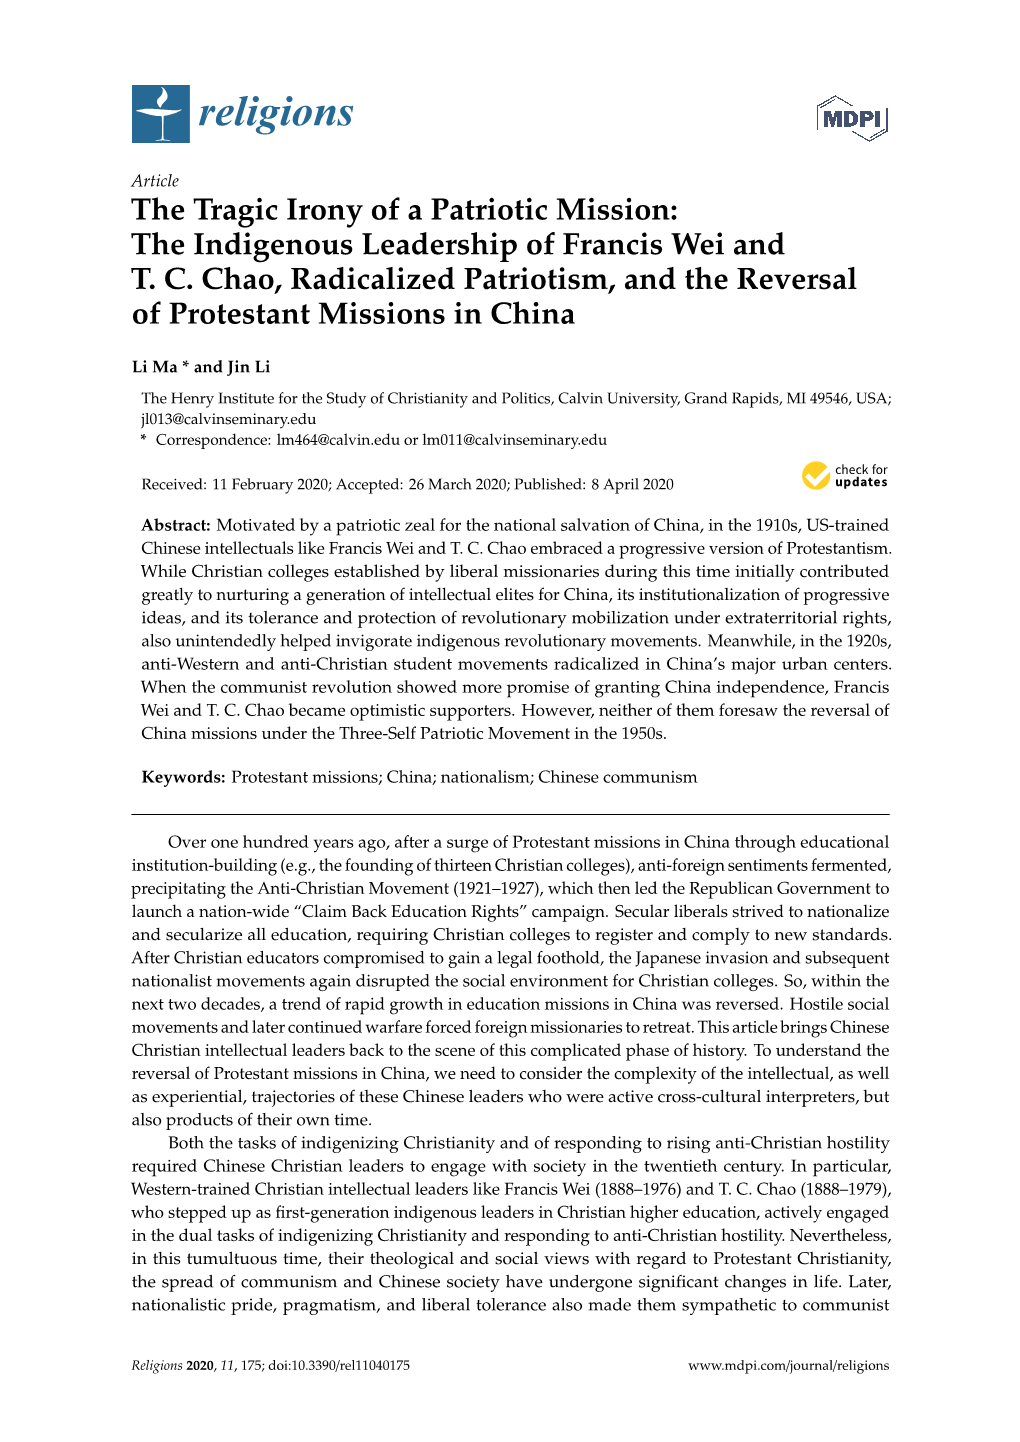 The Tragic Irony of a Patriotic Mission: the Indigenous Leadership of Francis Wei and T